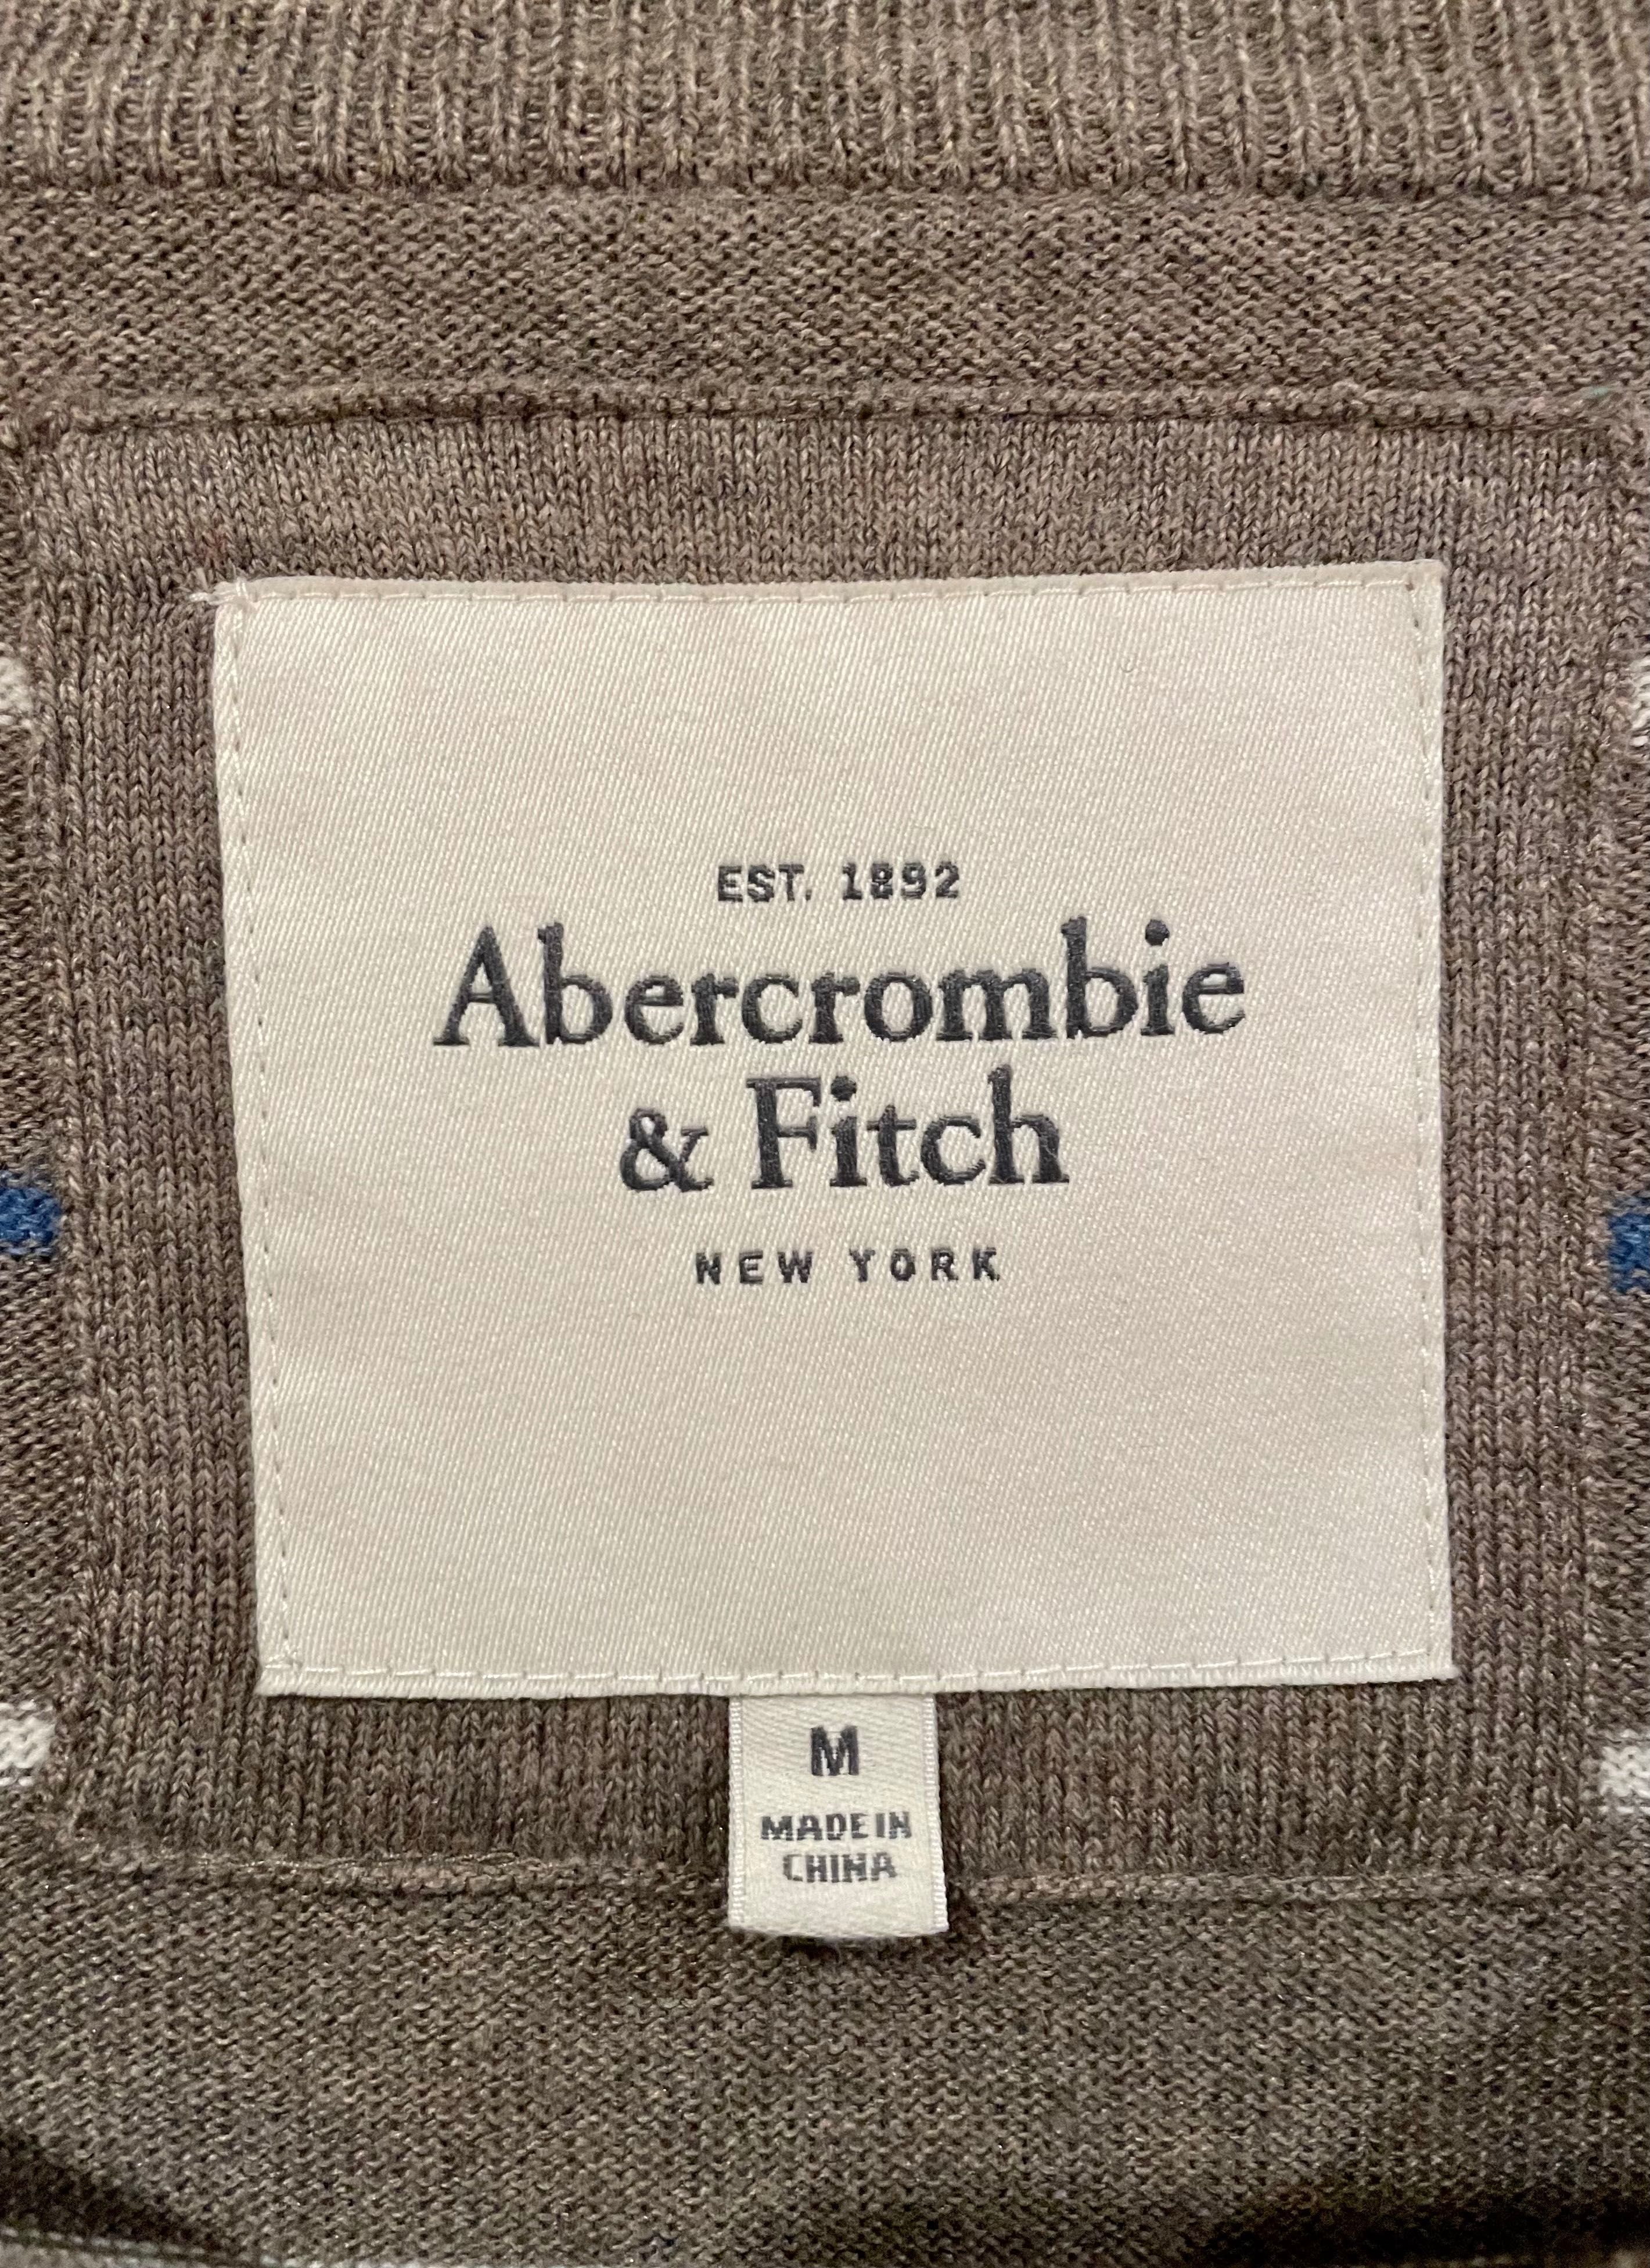 Lote Abercrombie & Fitch